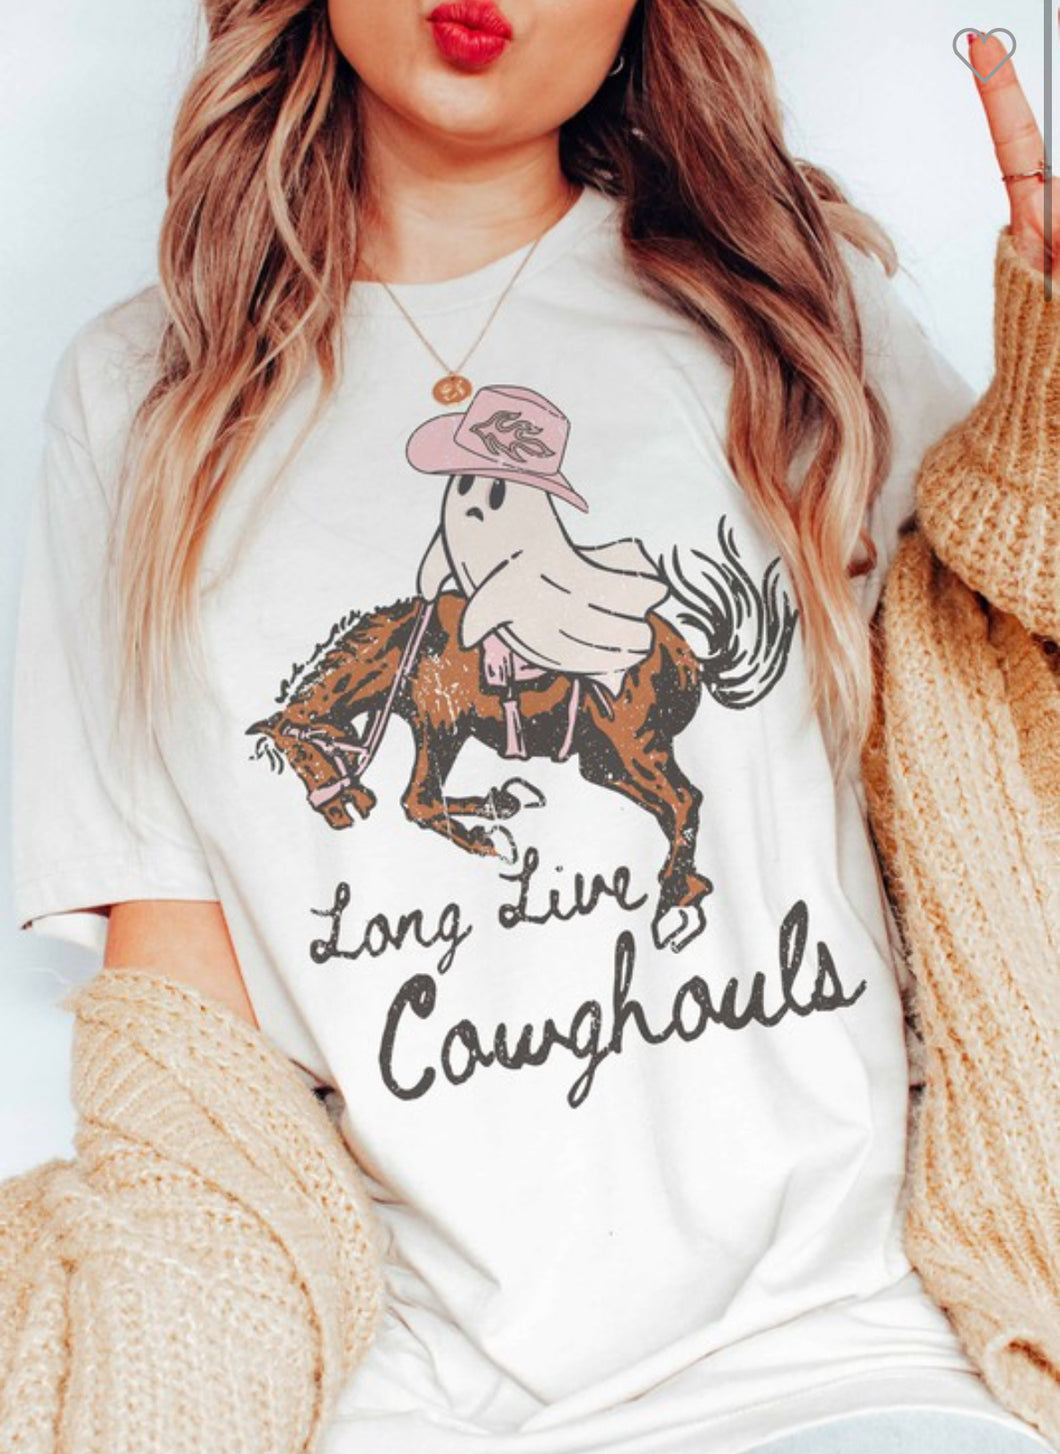 Long live Cowghouls